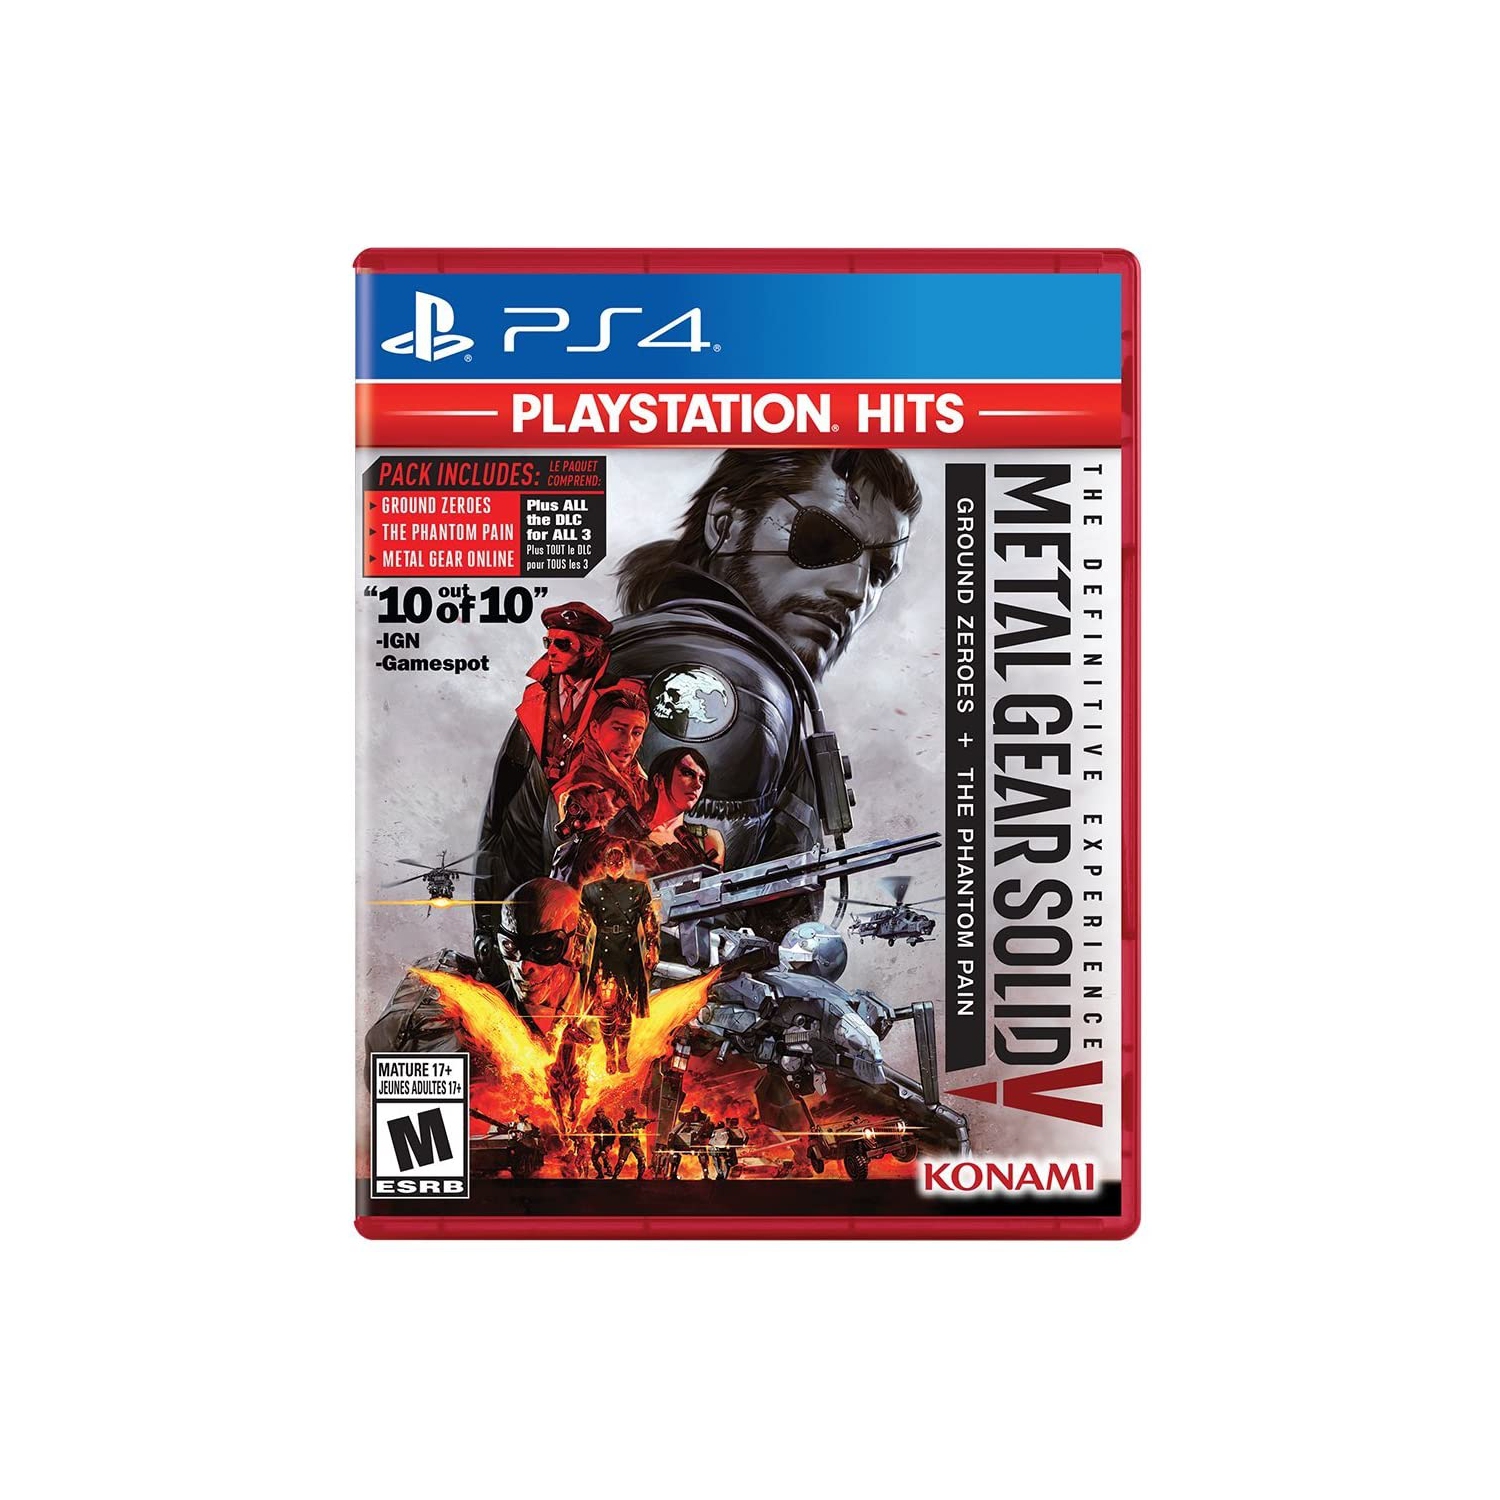 PS4 Metal Gear Solid V: The Definitive Experience Playstation Hits